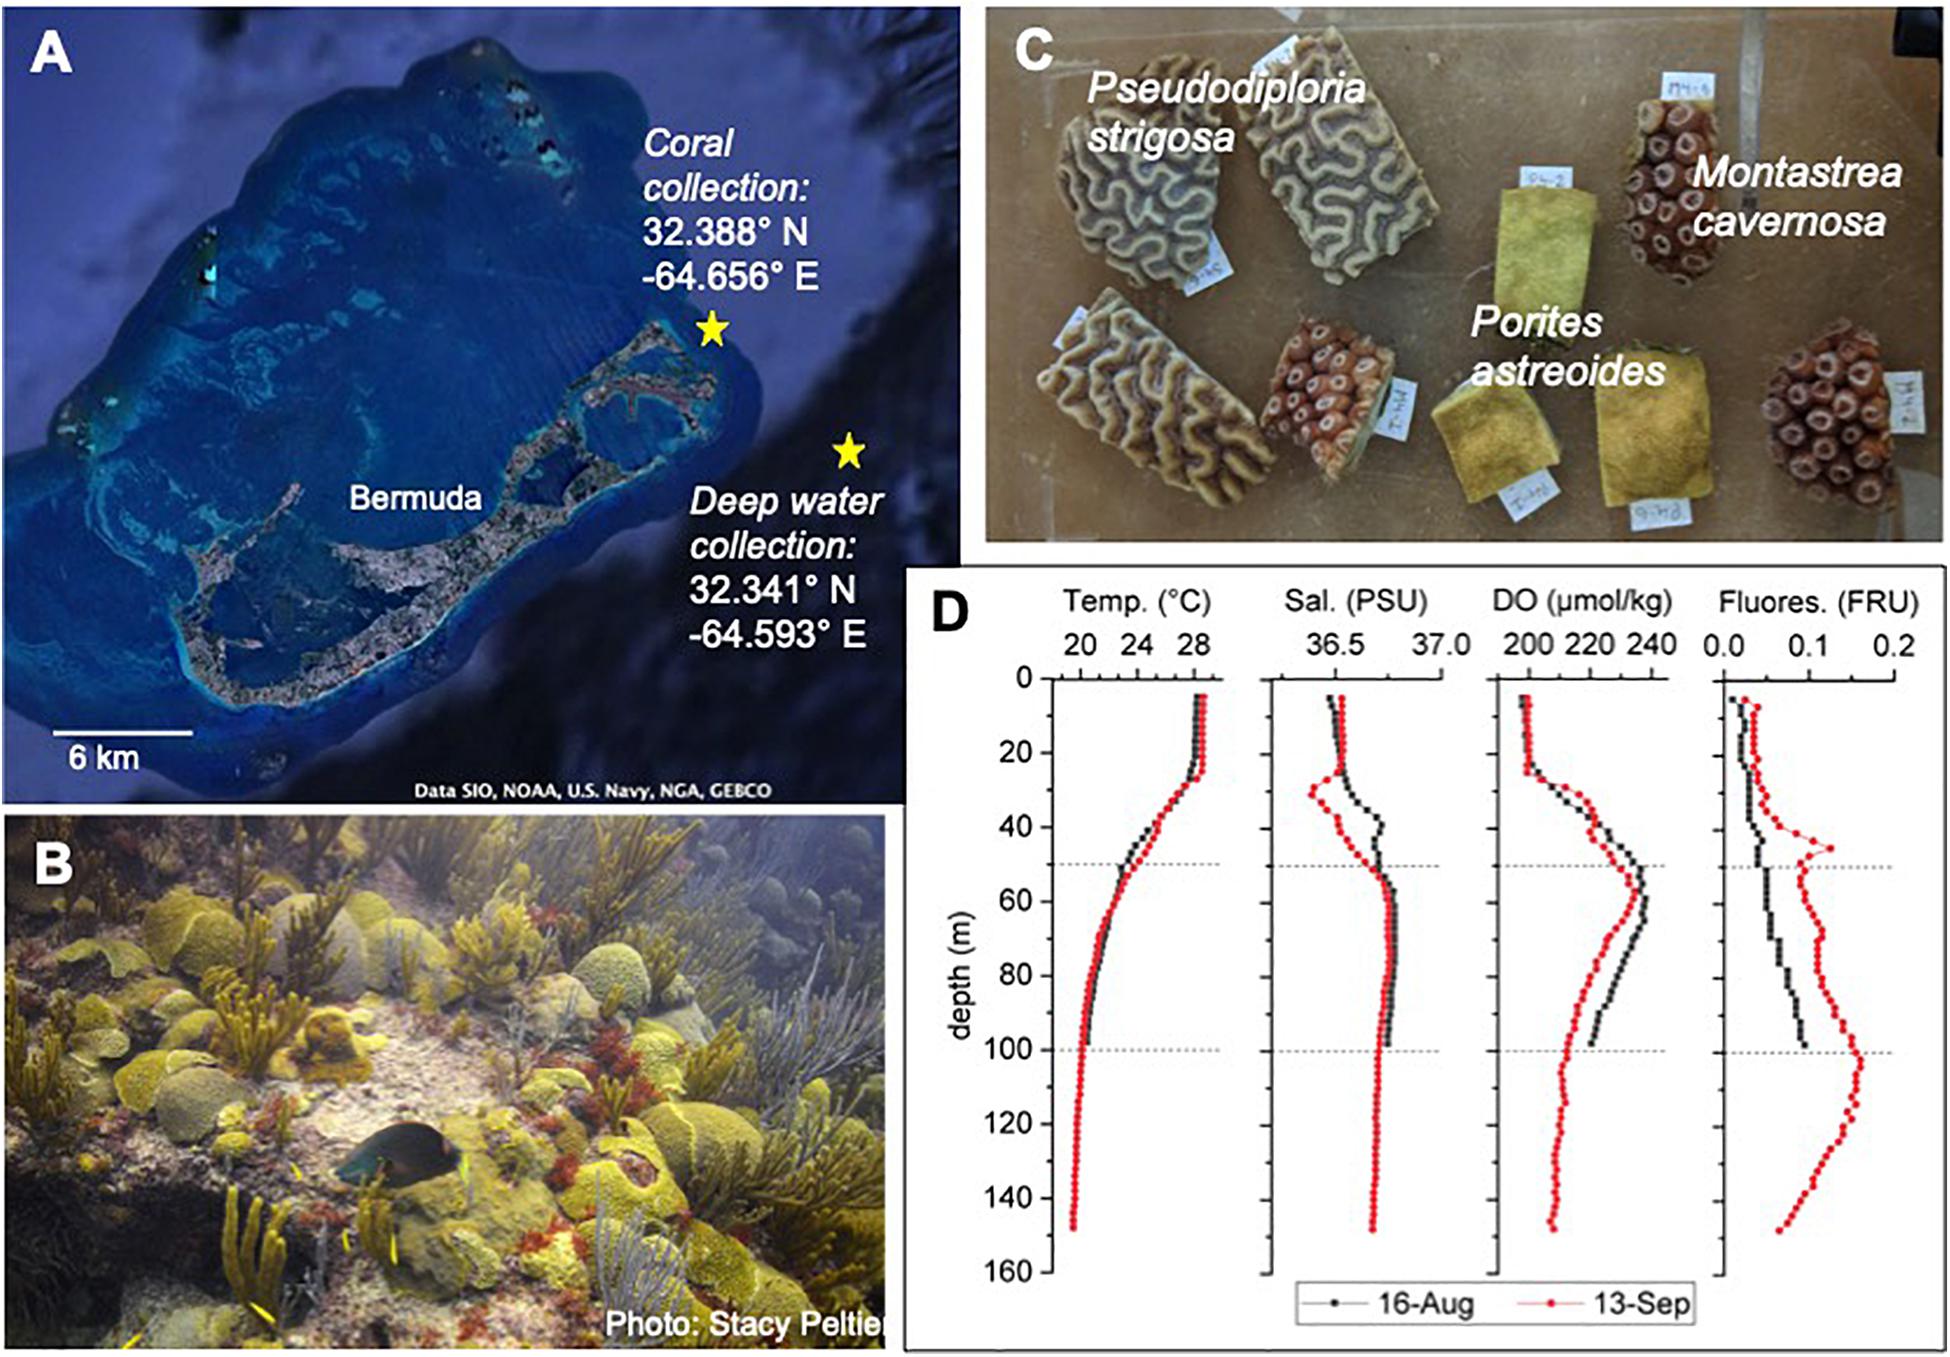 Frontiers Discrete Pulses Of Cooler Deep Water Can Decelerate Coral Bleaching During Thermal Stress Implications For Artificial Upwelling During Heat Stress Events Marine Science